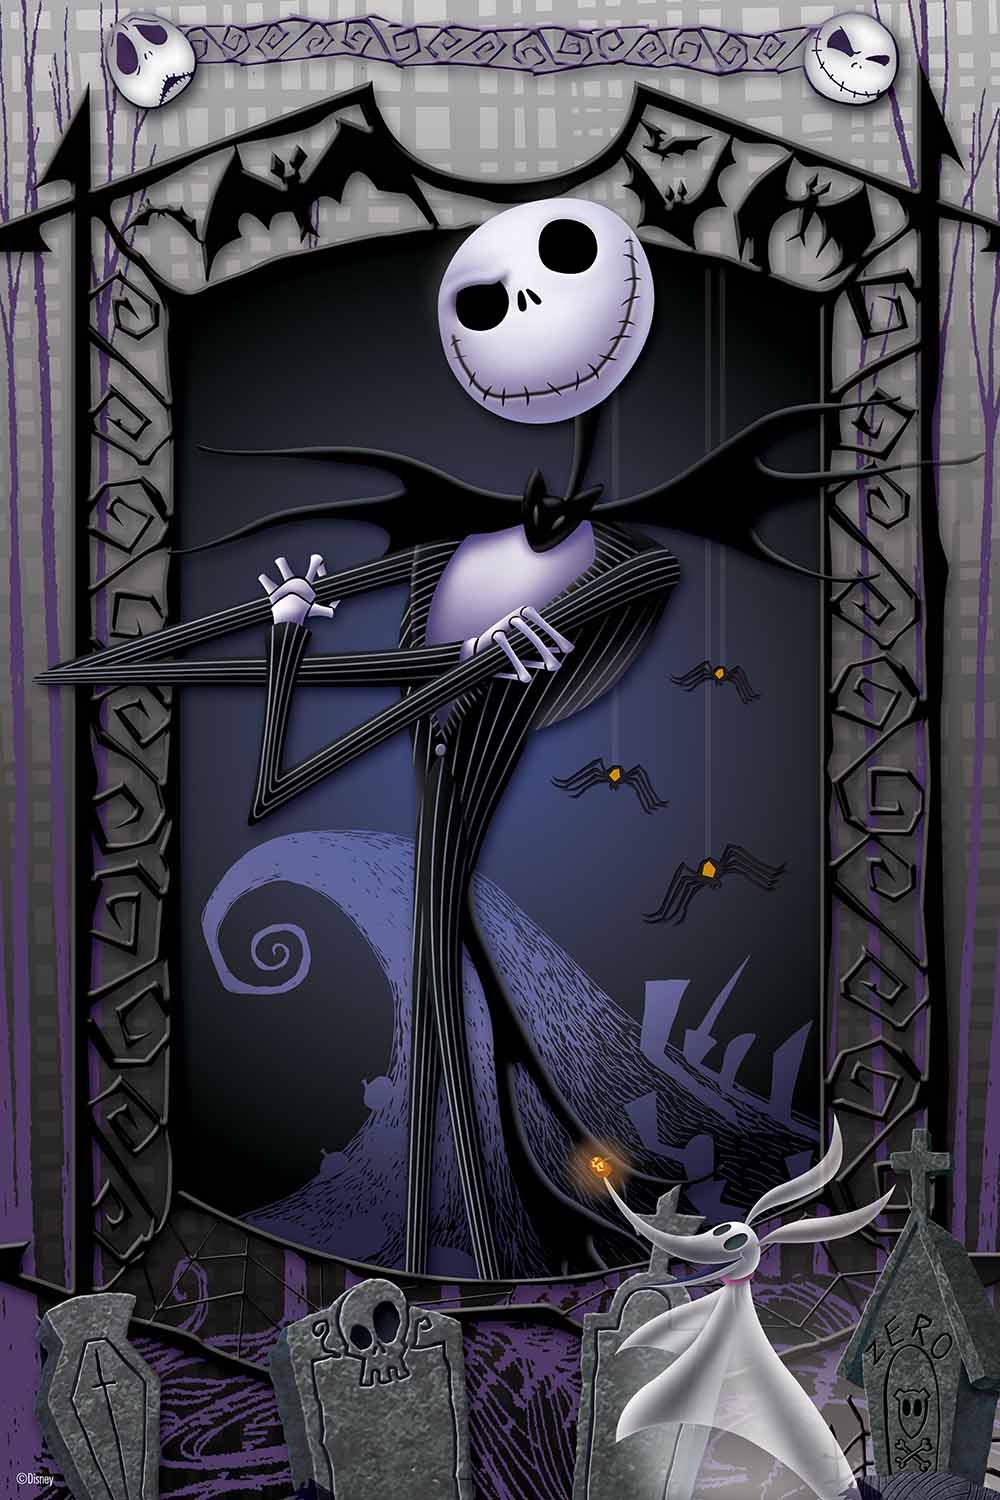 Nightmare Before Christmas Jigsaw Puzzles for Sale - Fine Art America